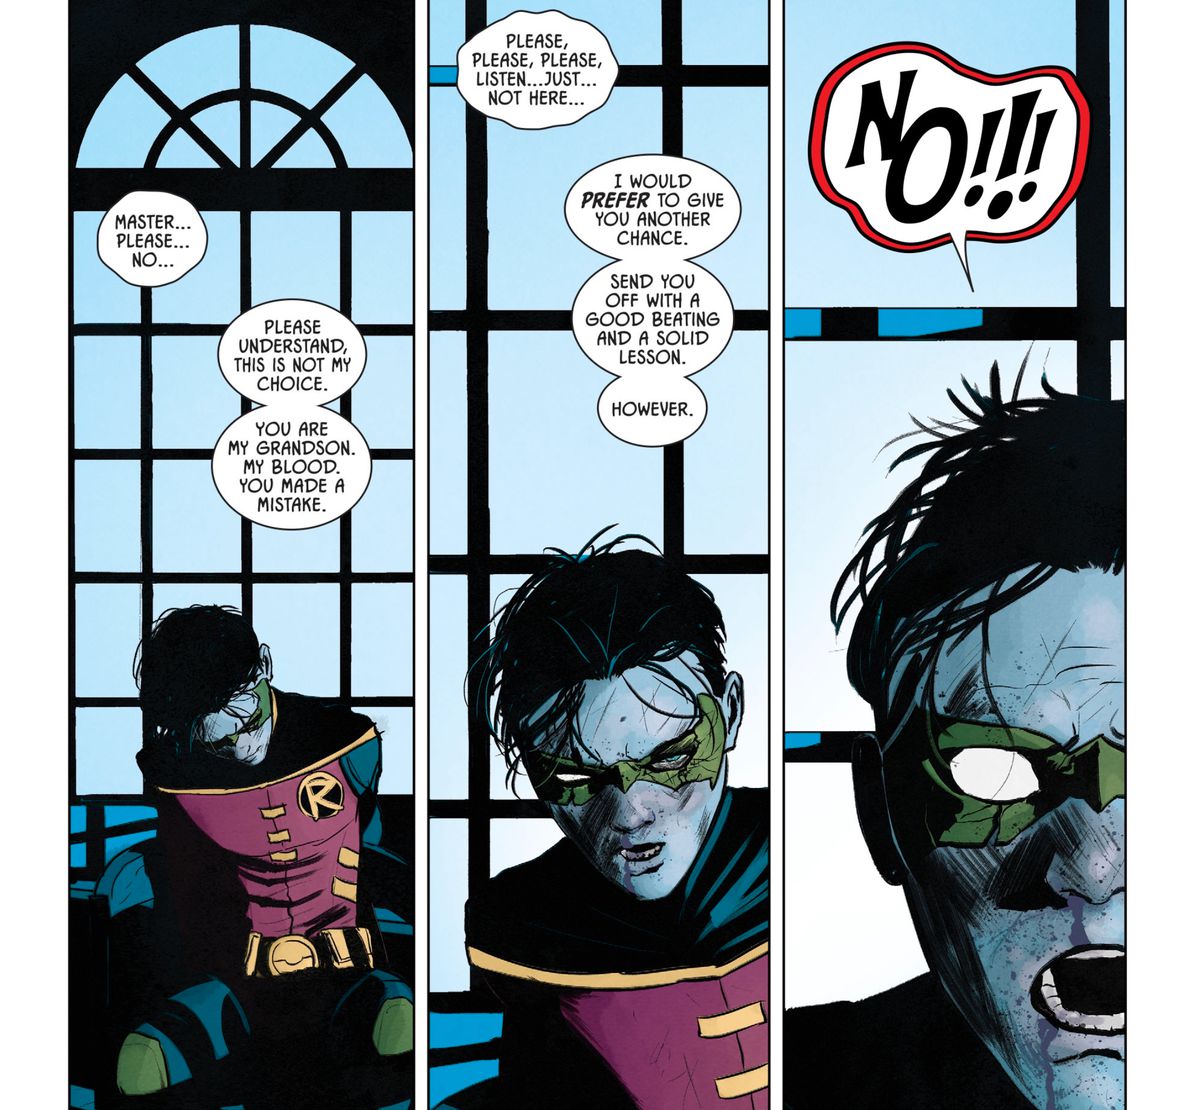 Damian Wayne/Robin comes back to consciousness as his grandfather explains that he’s about to kill Alfred Pennyworth in order to punish Damian, in Batman #77, DC Comics (2019). 